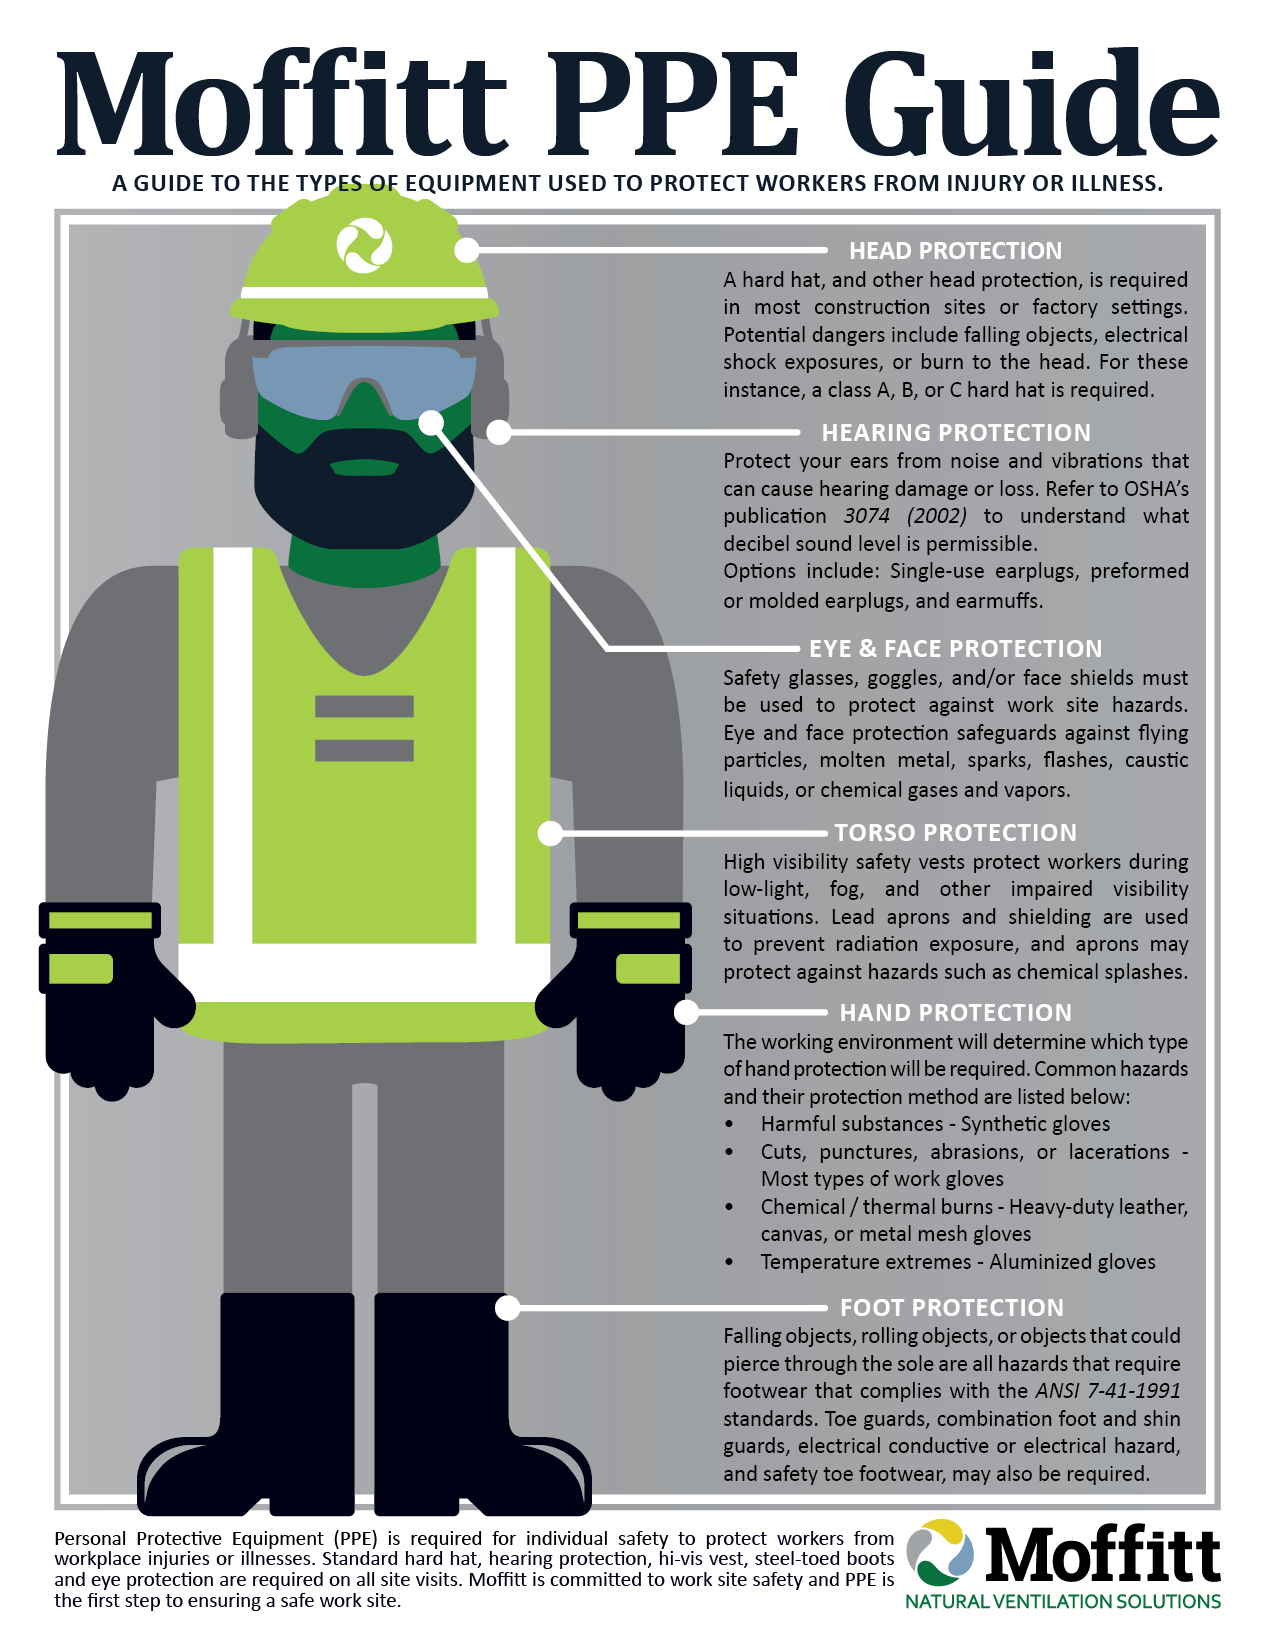 Moffitt PPE Info Graphic Safety Guy